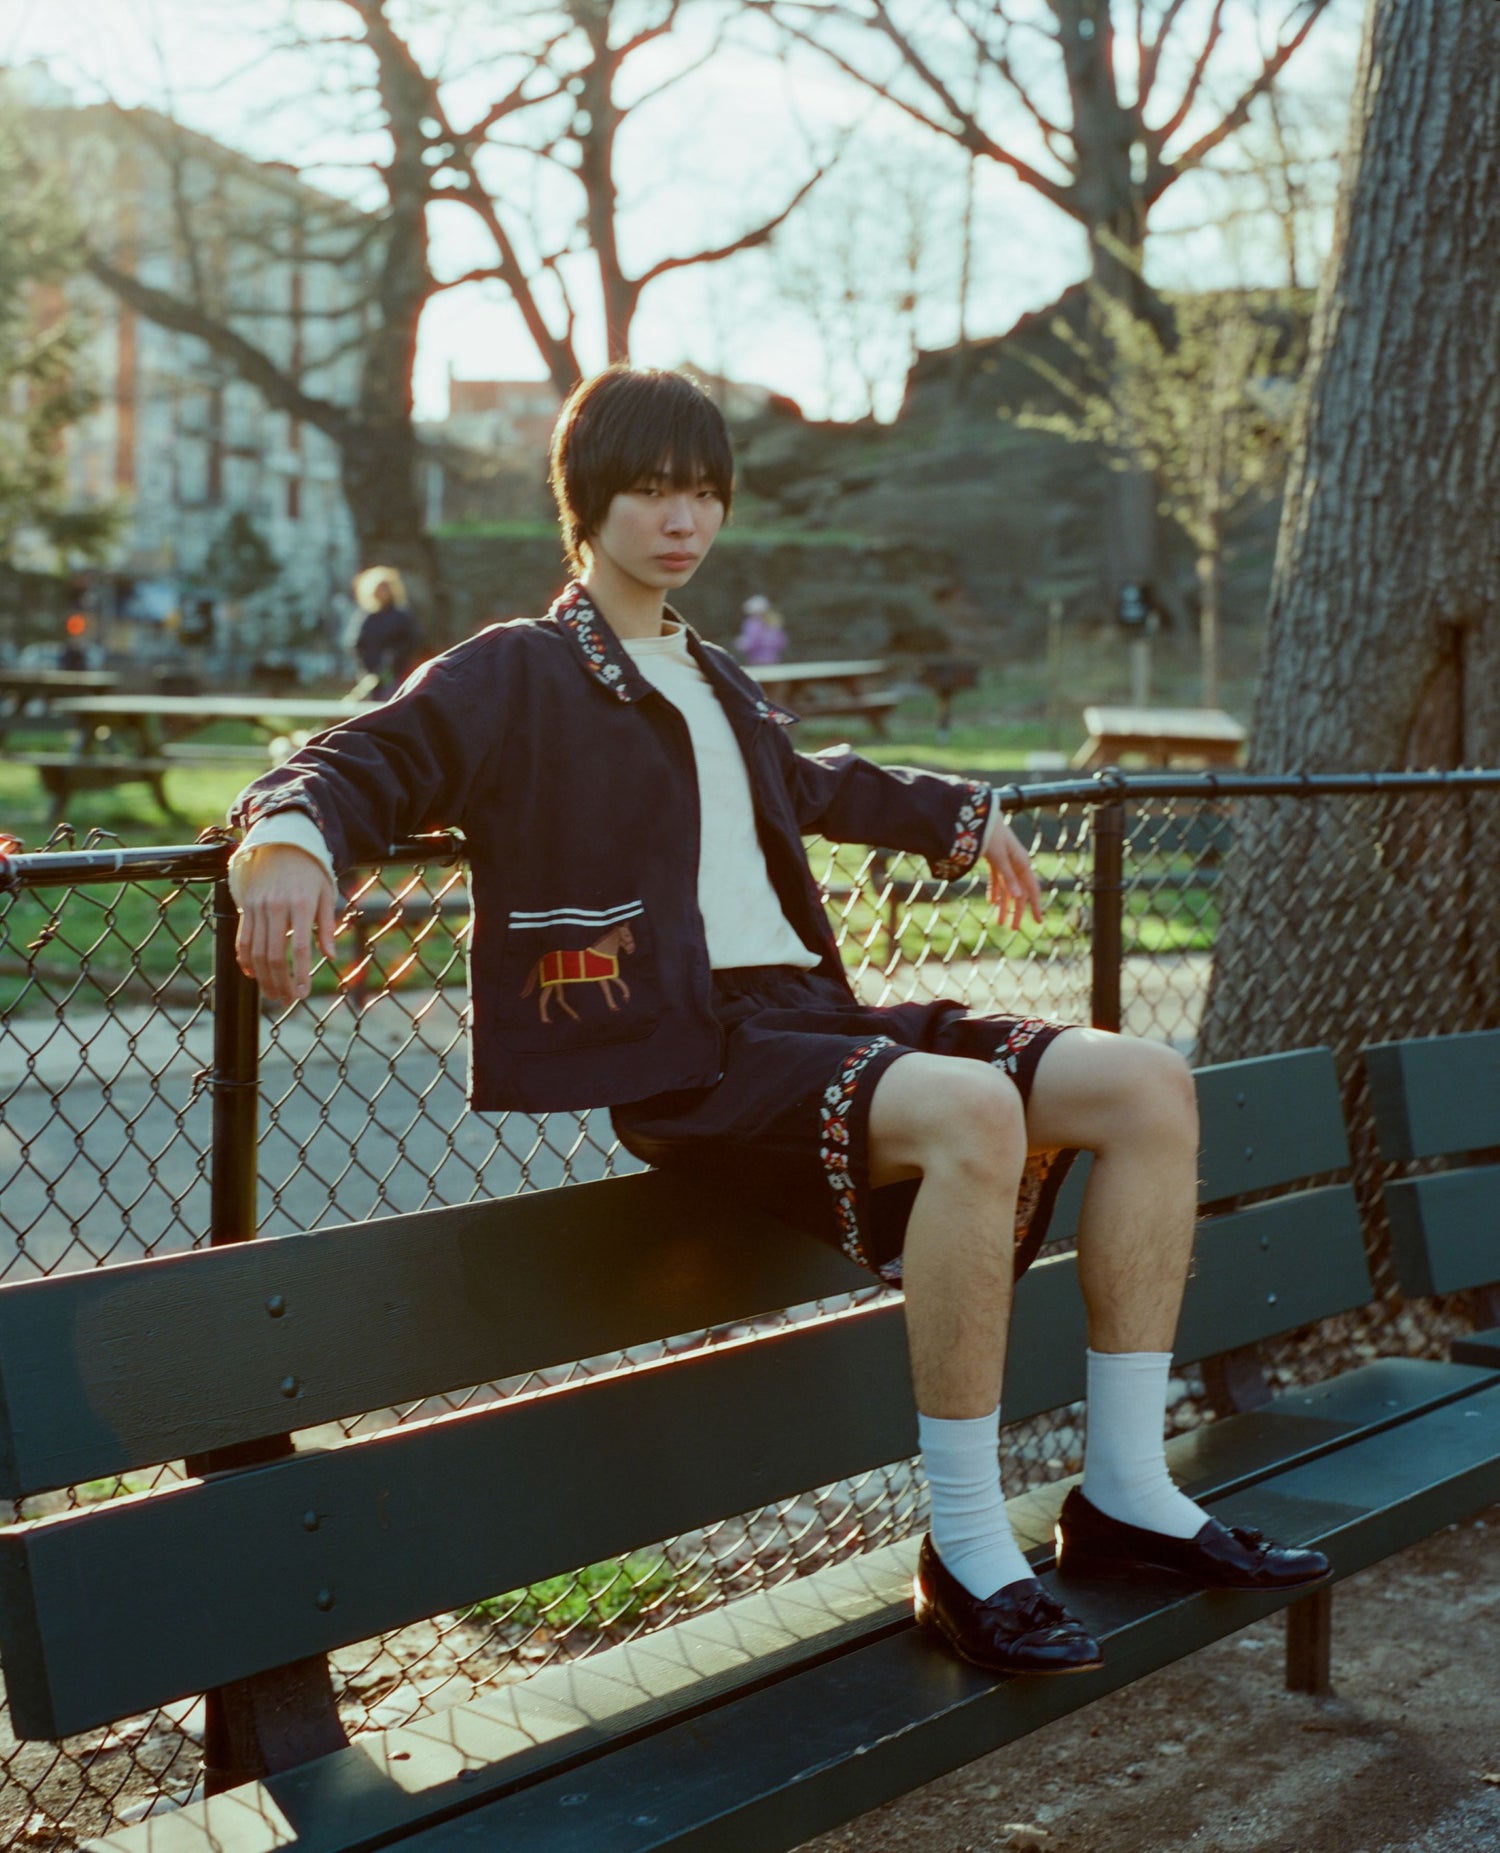 Young person with a bob haircut sitting on a park bench, wearing a dark jacket, patterned shirt, Horse Equine Twill Shorts by Found, and loafers, casually posing during a sunny day.